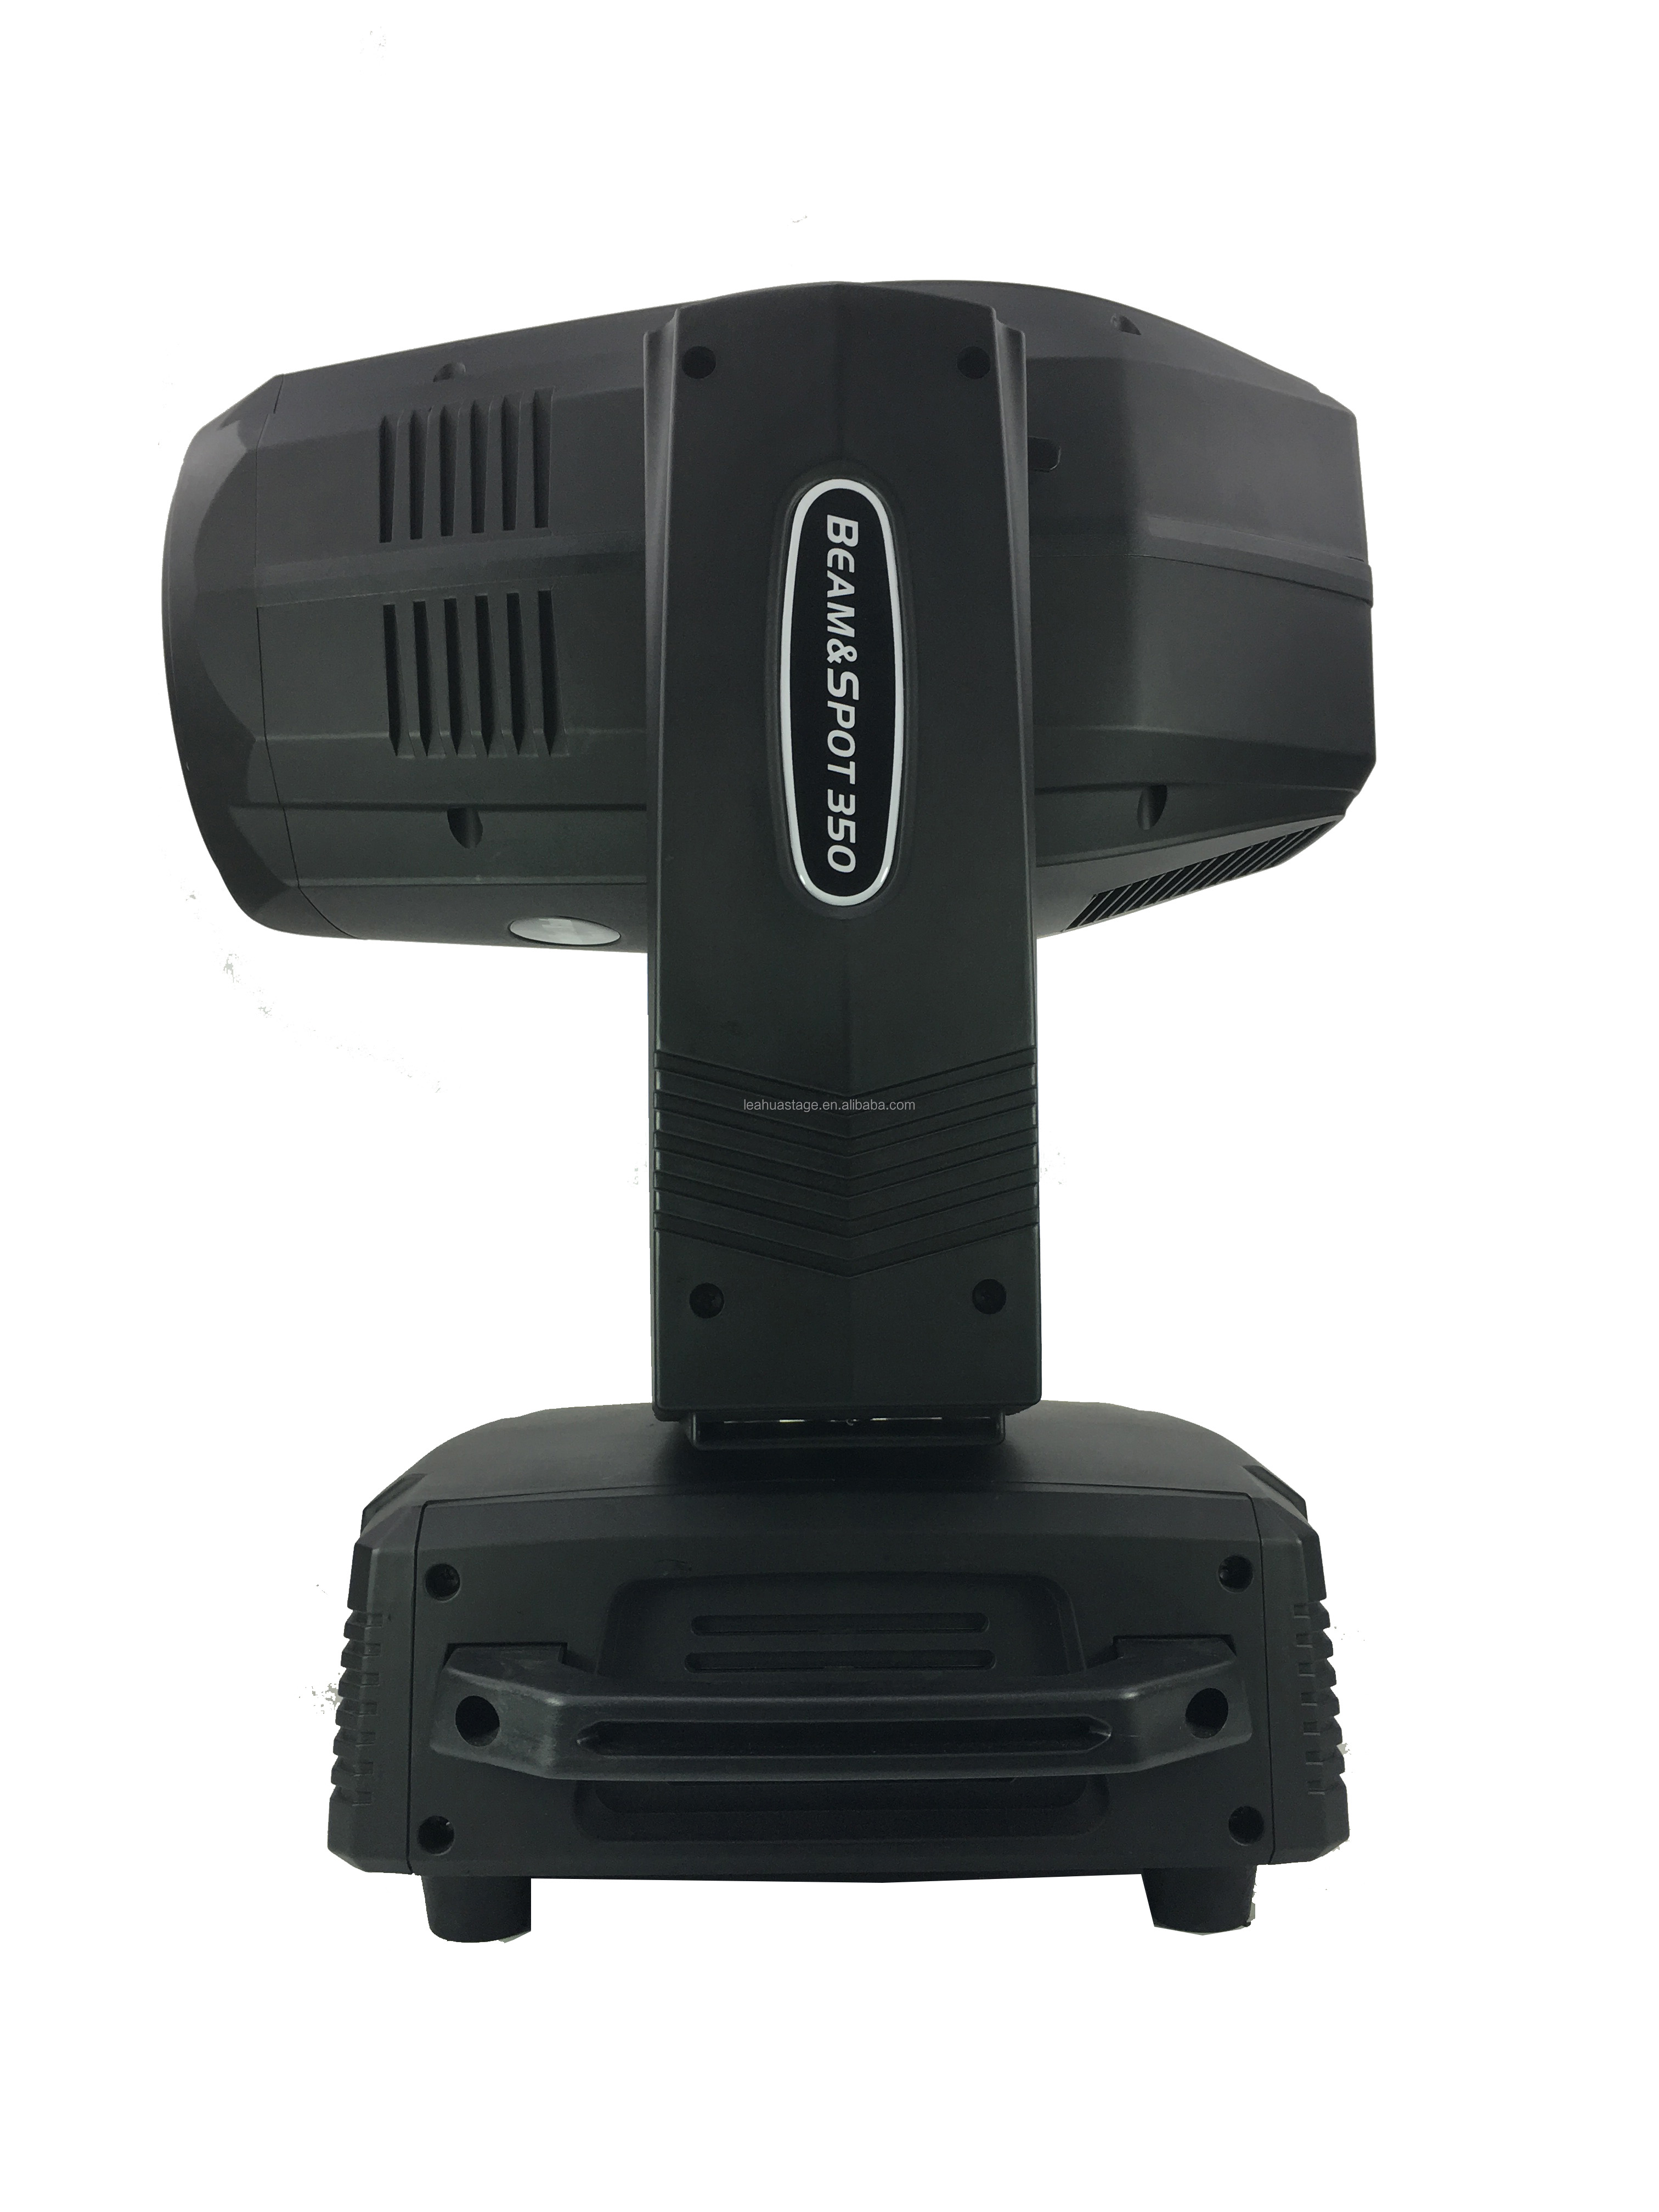 17r Beam Spot Wash Light 350w Moving Head BSW 3in1